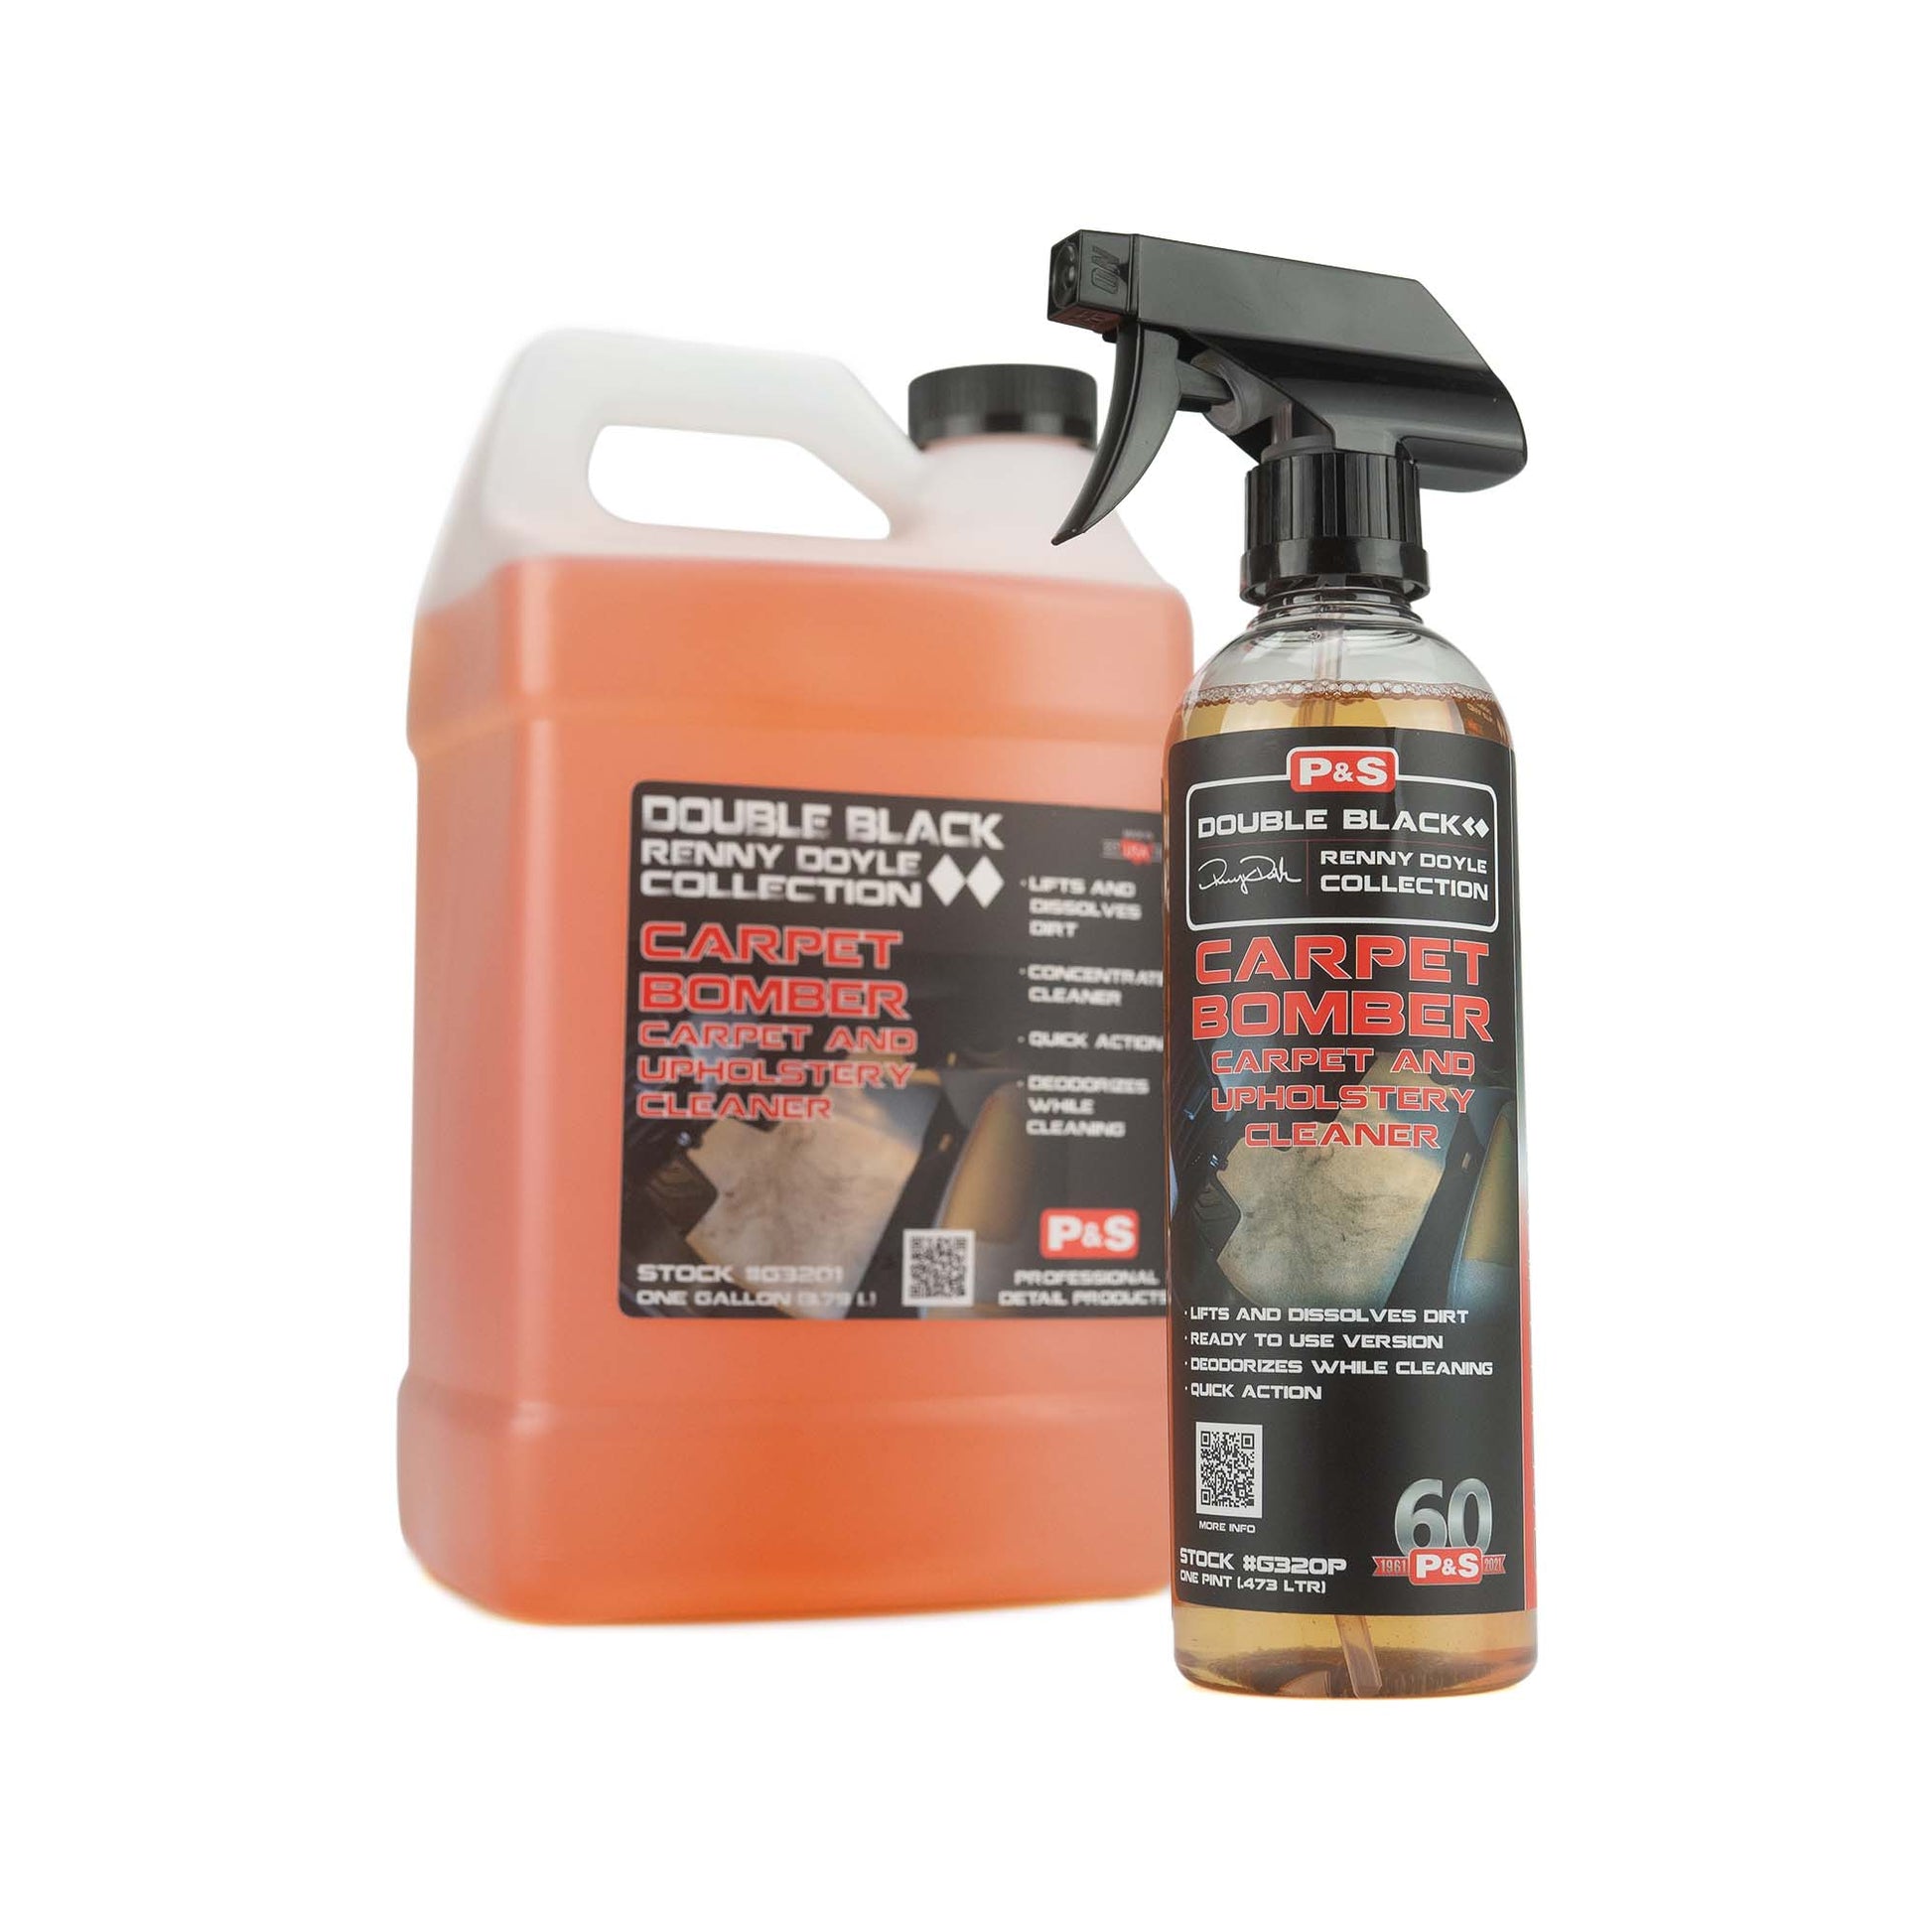 P&S Double Black Collection Bomber Carpet And Upholstery Cleaner